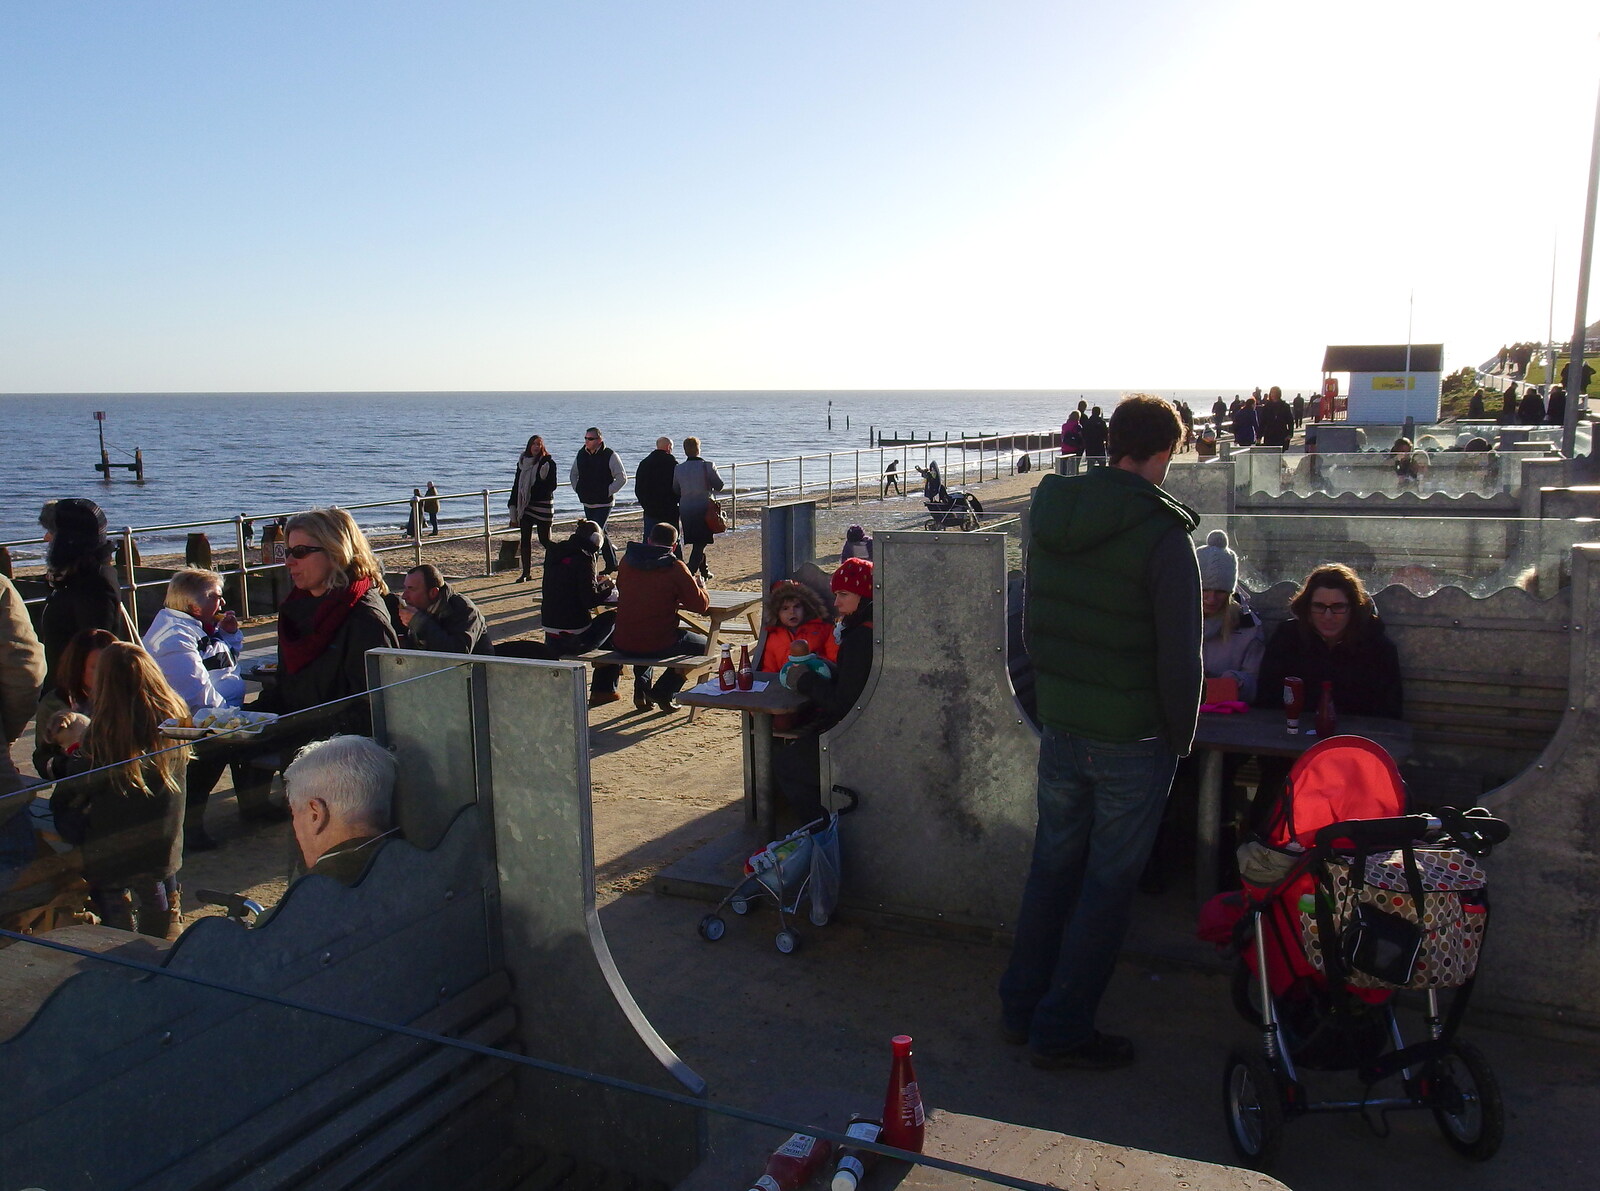 The prom is fairly crowded from Post-Christmas Southwold, Suffolk - 29th December 2013